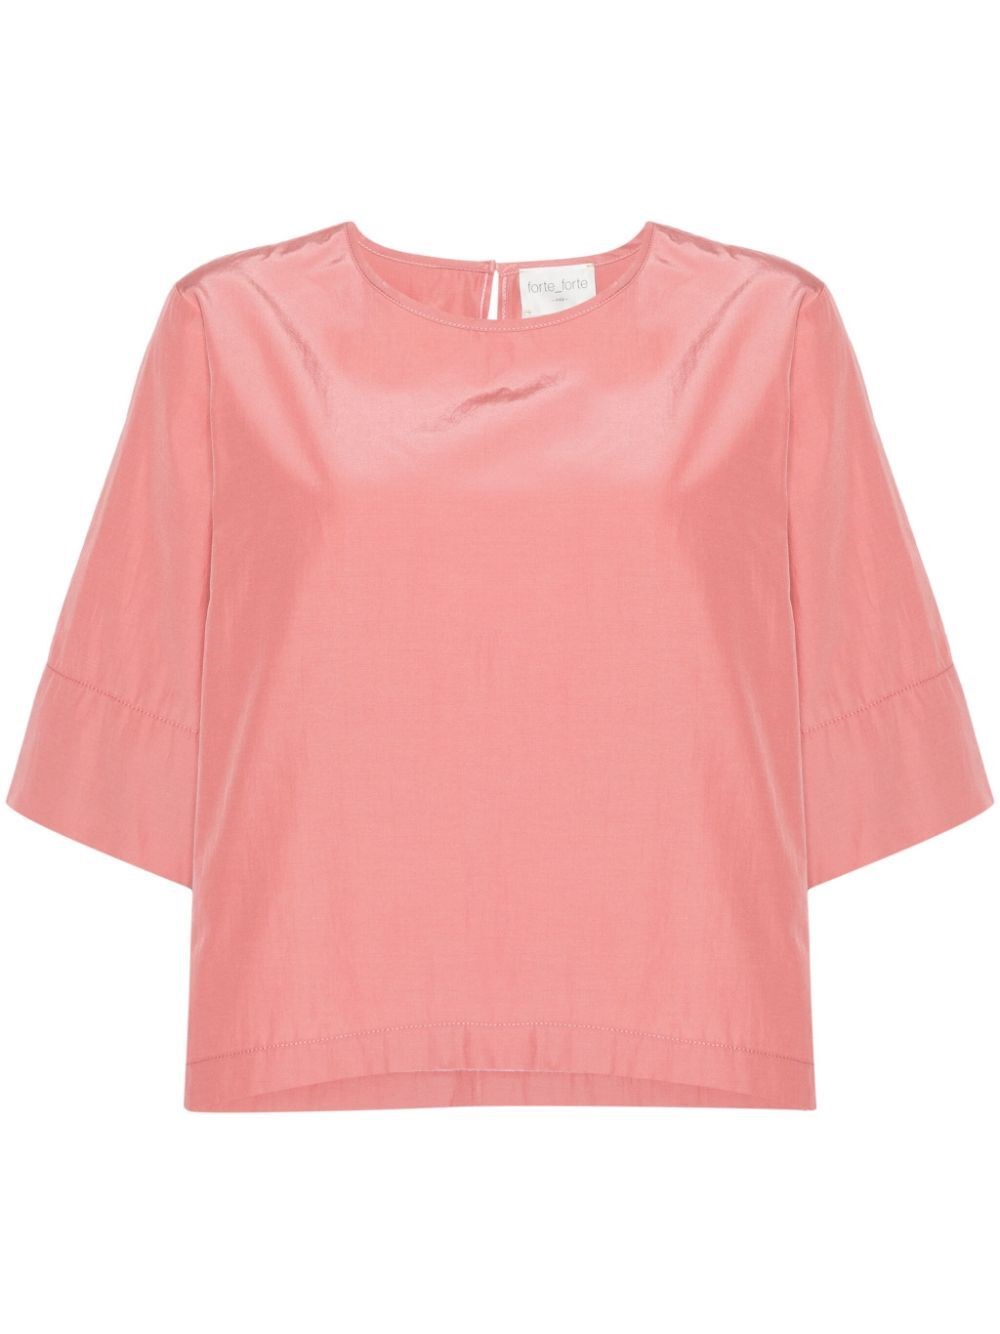 Forte Forte `chic Taffettas` Oversized T-shirt In Pink